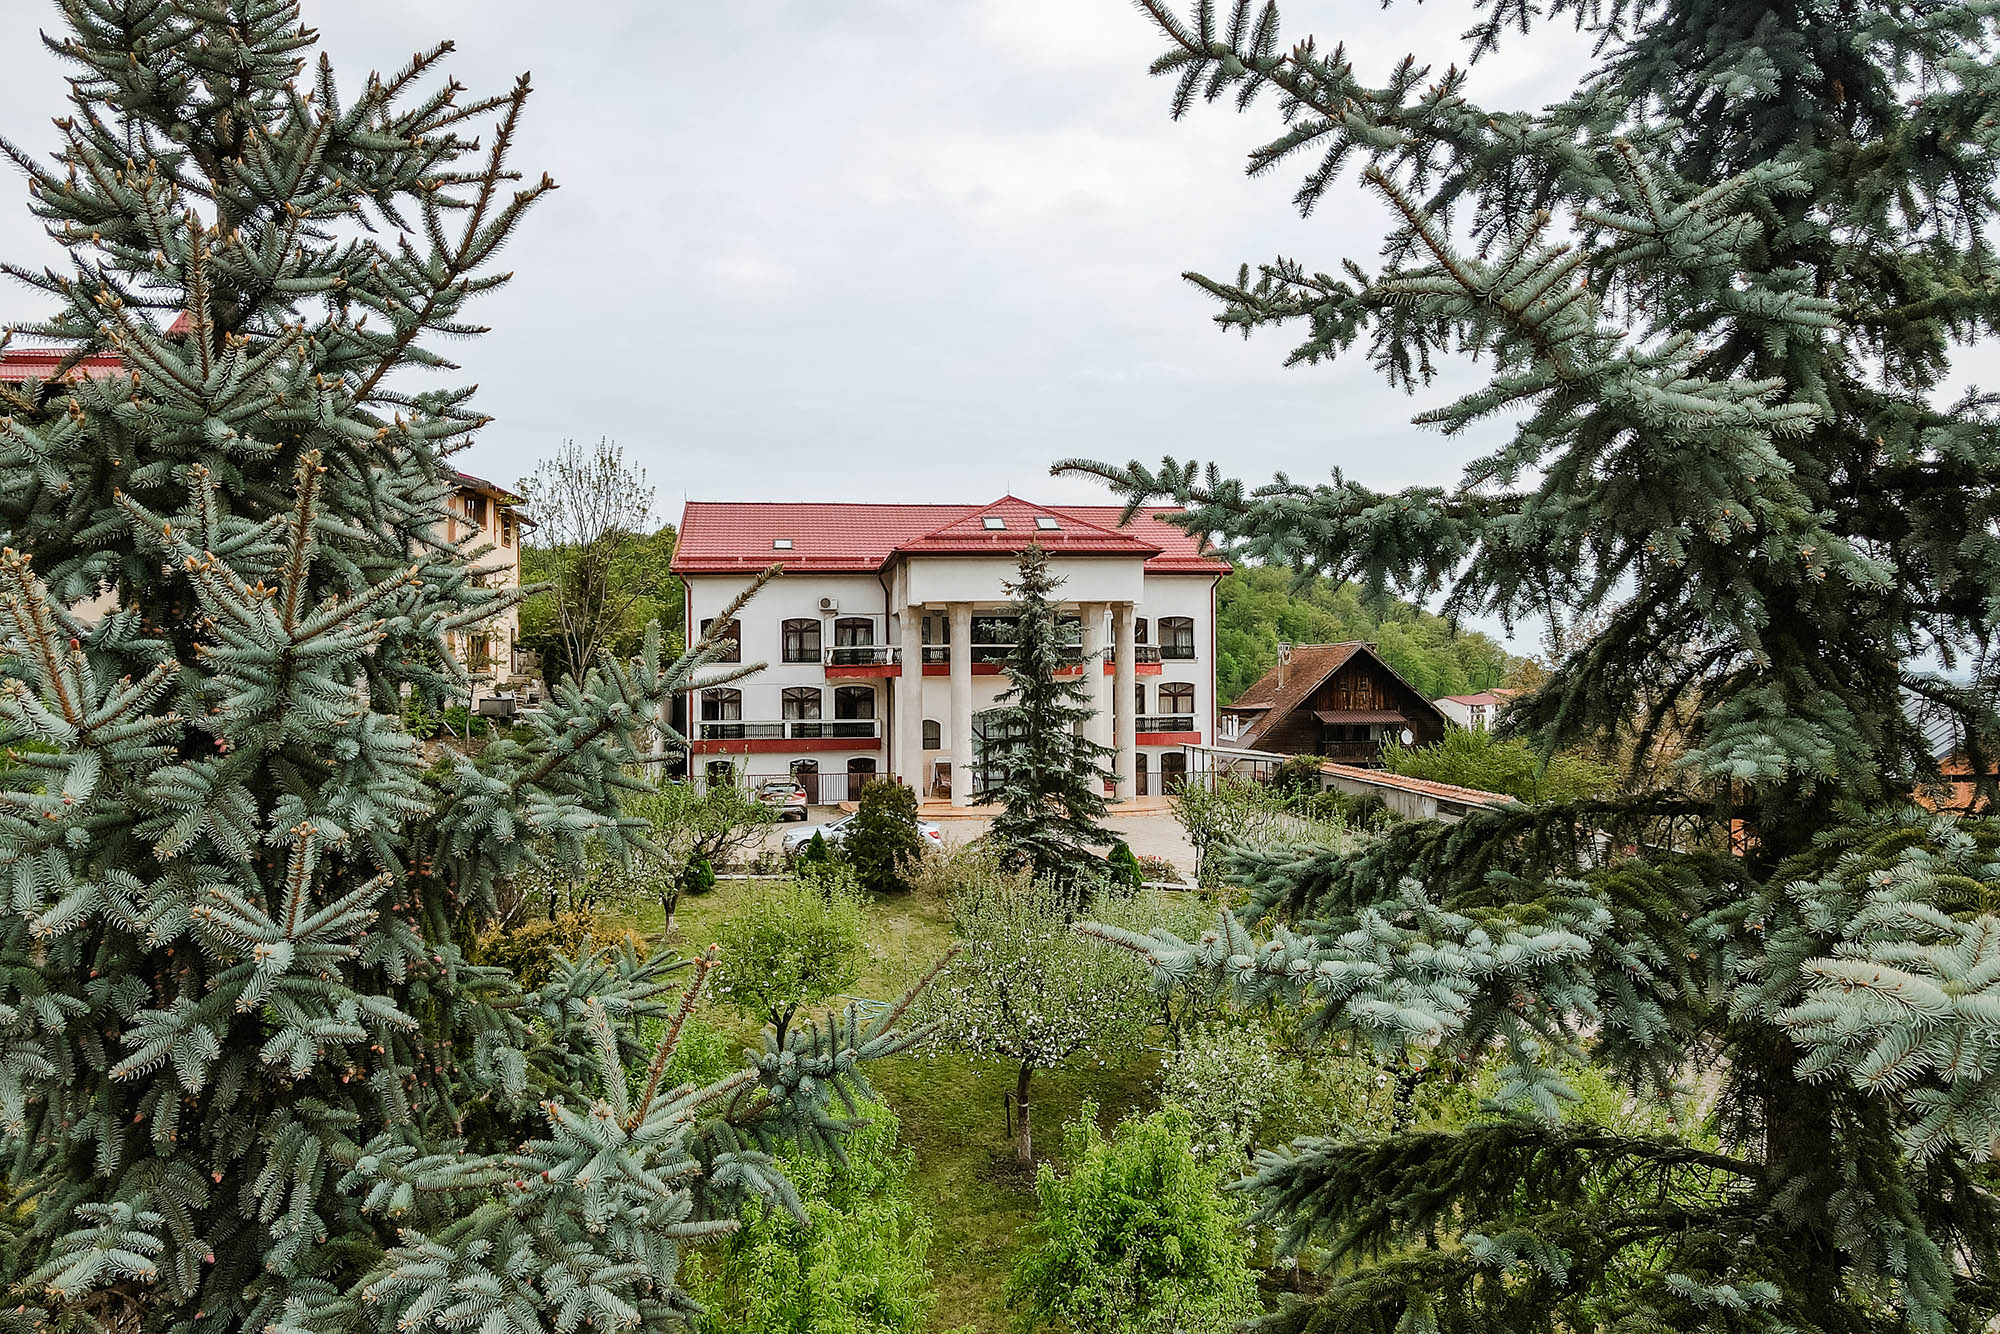 Indoor pool and vicinity of the forest in a residential area of Braov